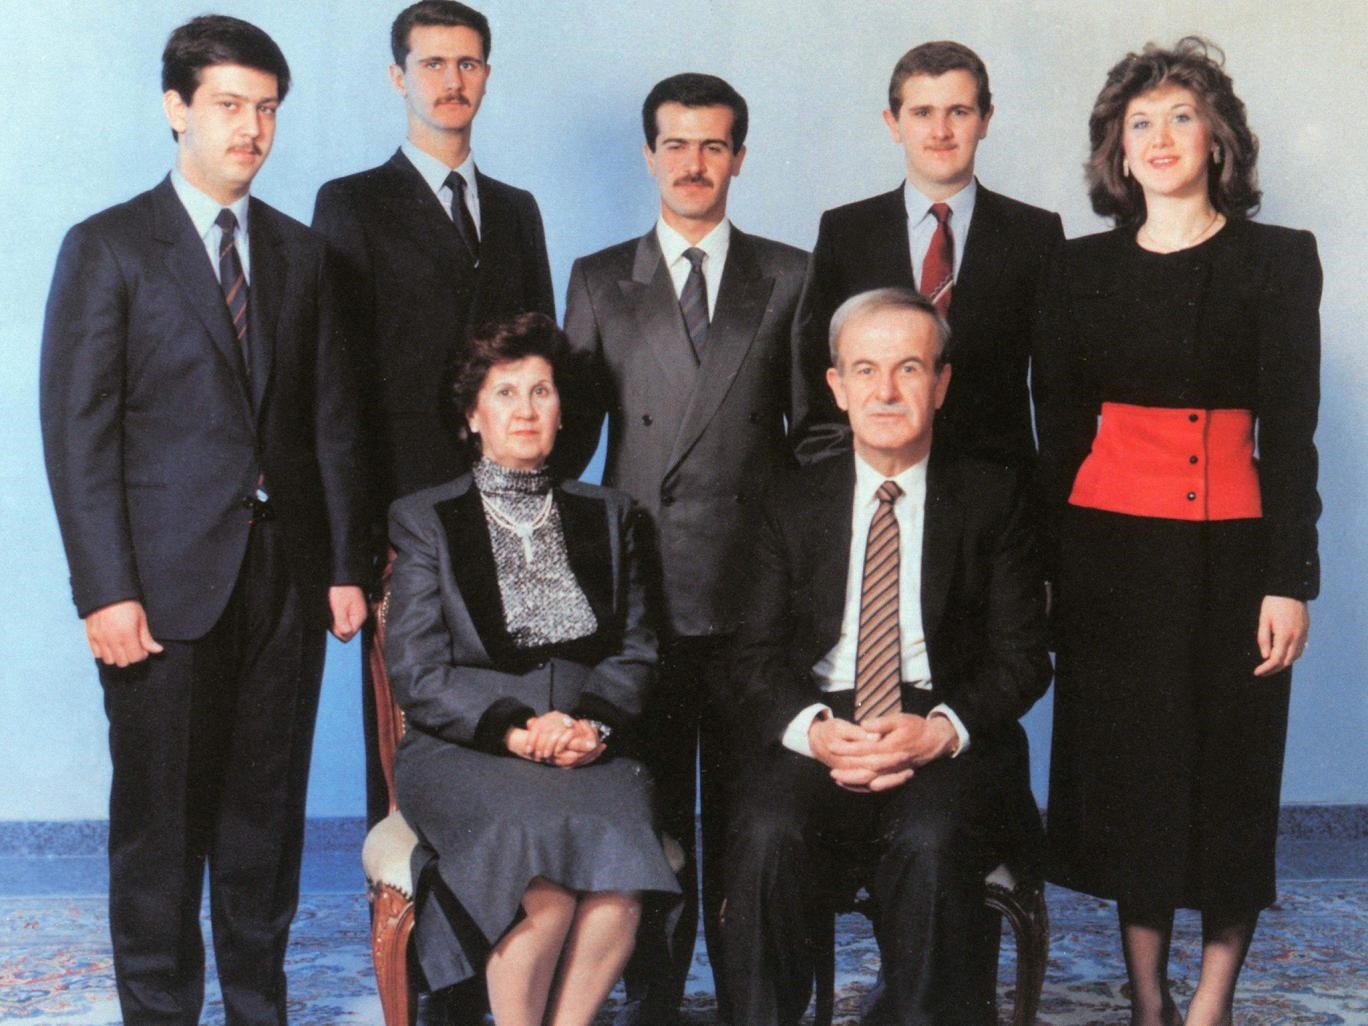 The Assad family. Hafez Assad and his wife Anisa Makhlouf. On the back row, from left to right: Maher, Bashar, Basil, Majid, and Bushra Assad.